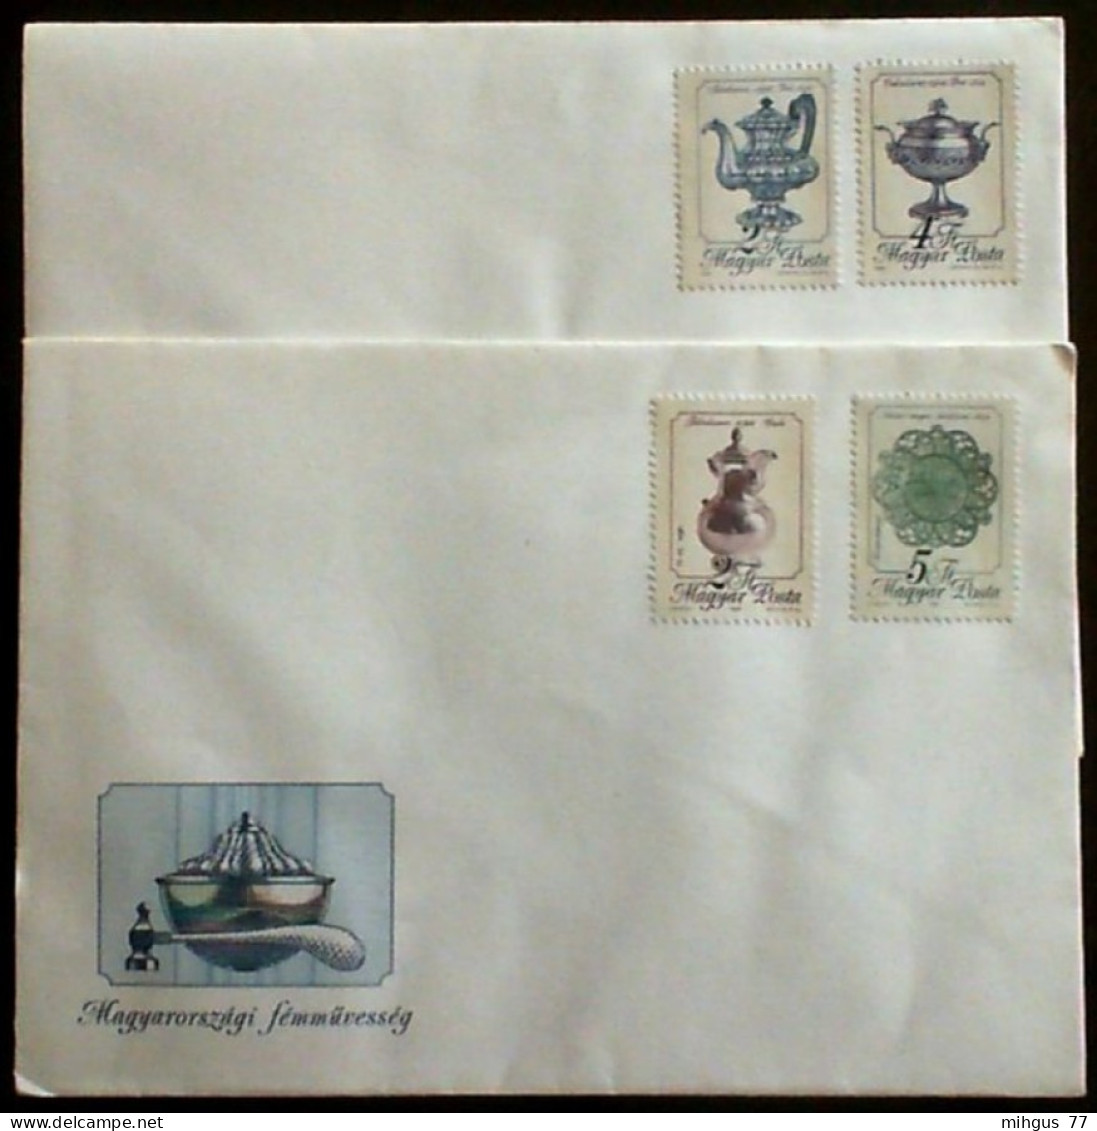 Hungary 1988 FDC Covers - Covers & Documents